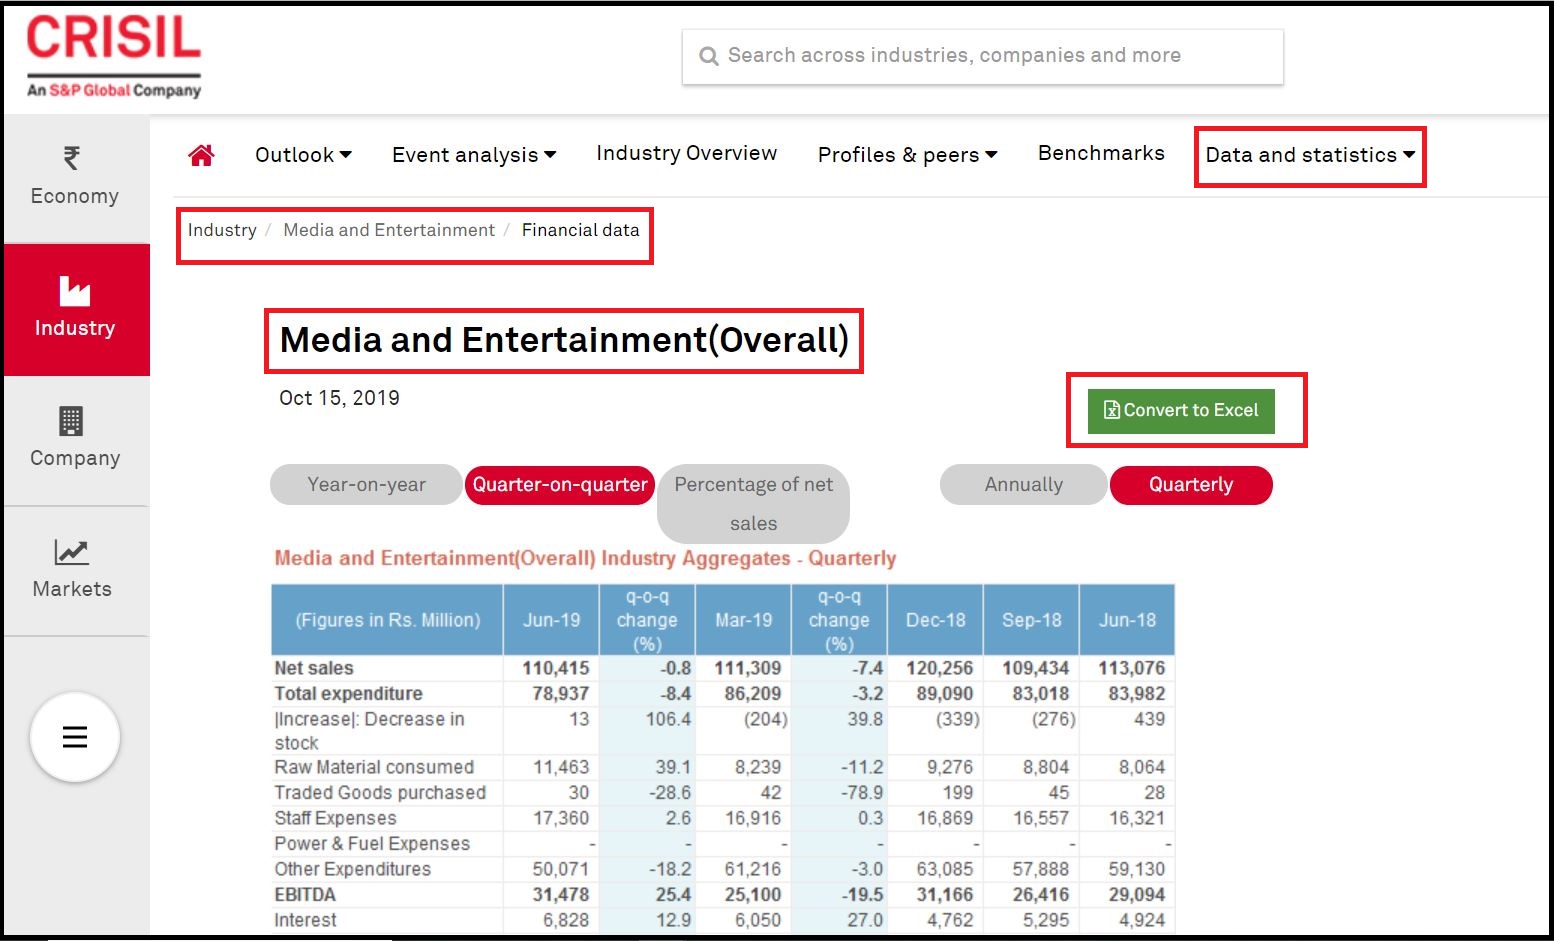 Open Crisil Research (Log-in / Register to Crisil) then Click on Industry and Select Technology, Media & Telecommunication then Click on Media and Entertainment and Select Data & Statistics